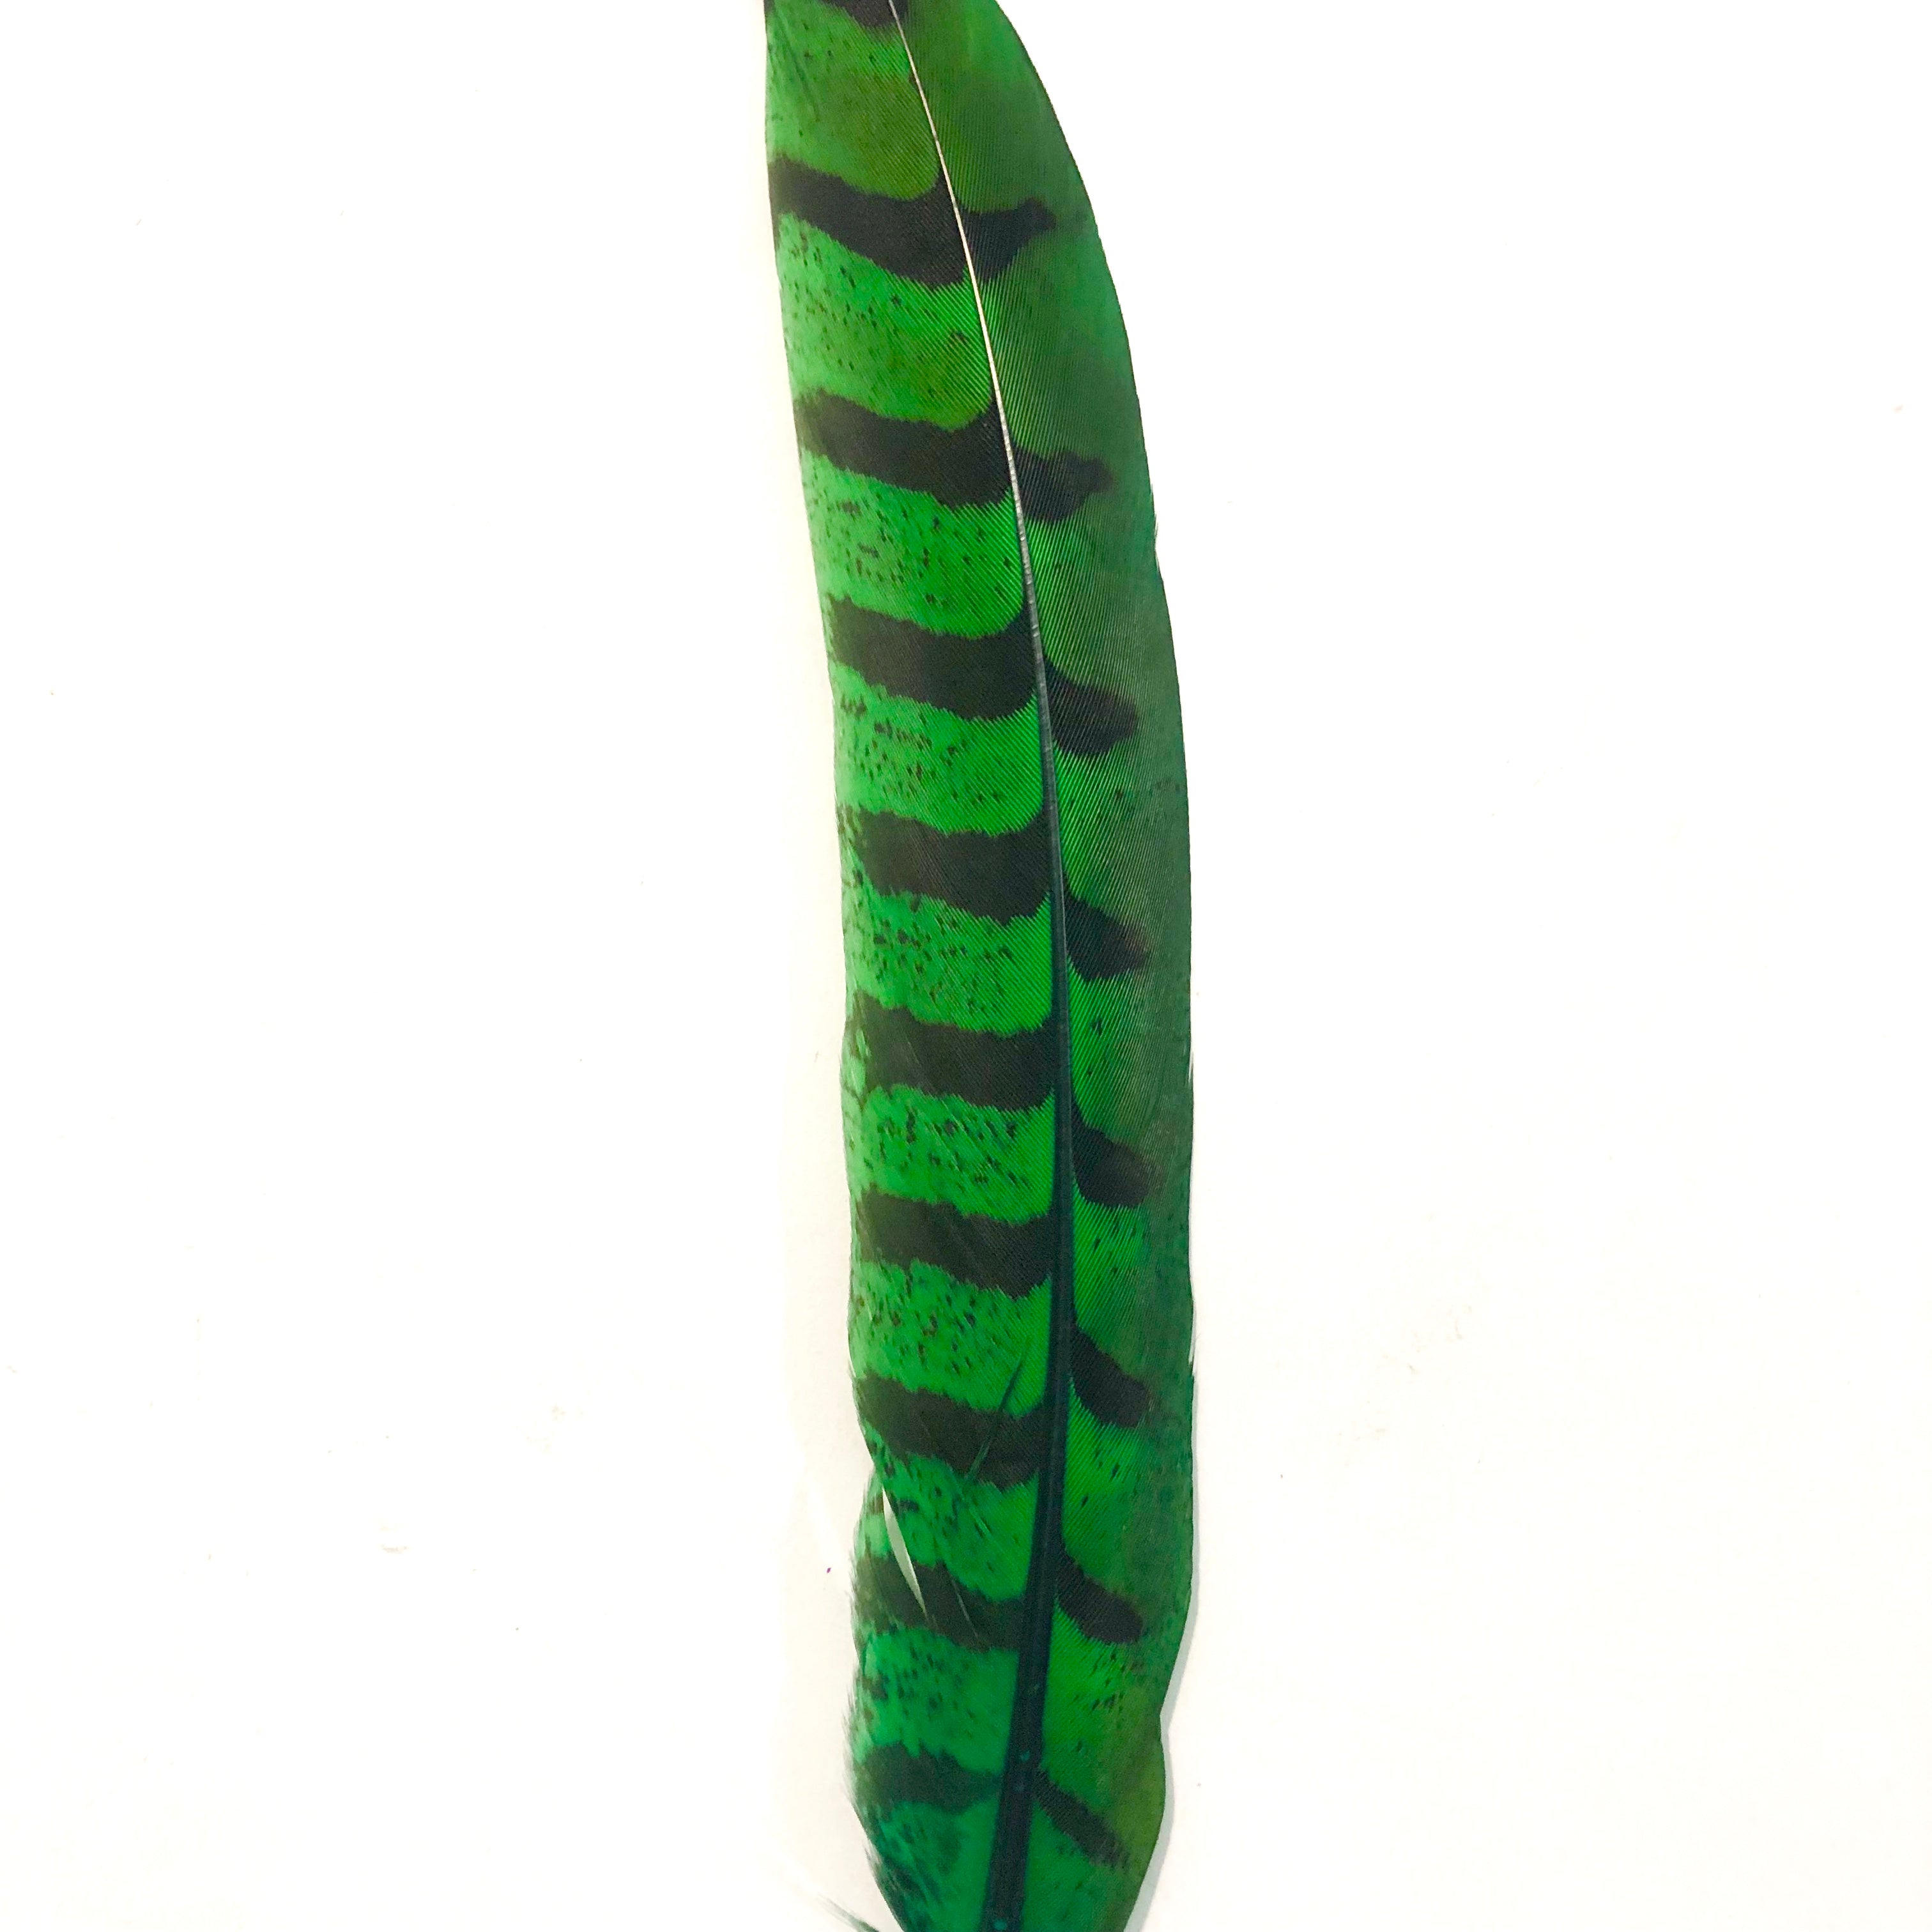 8" to 10" Reeves Pheasant Tail Feather - Green